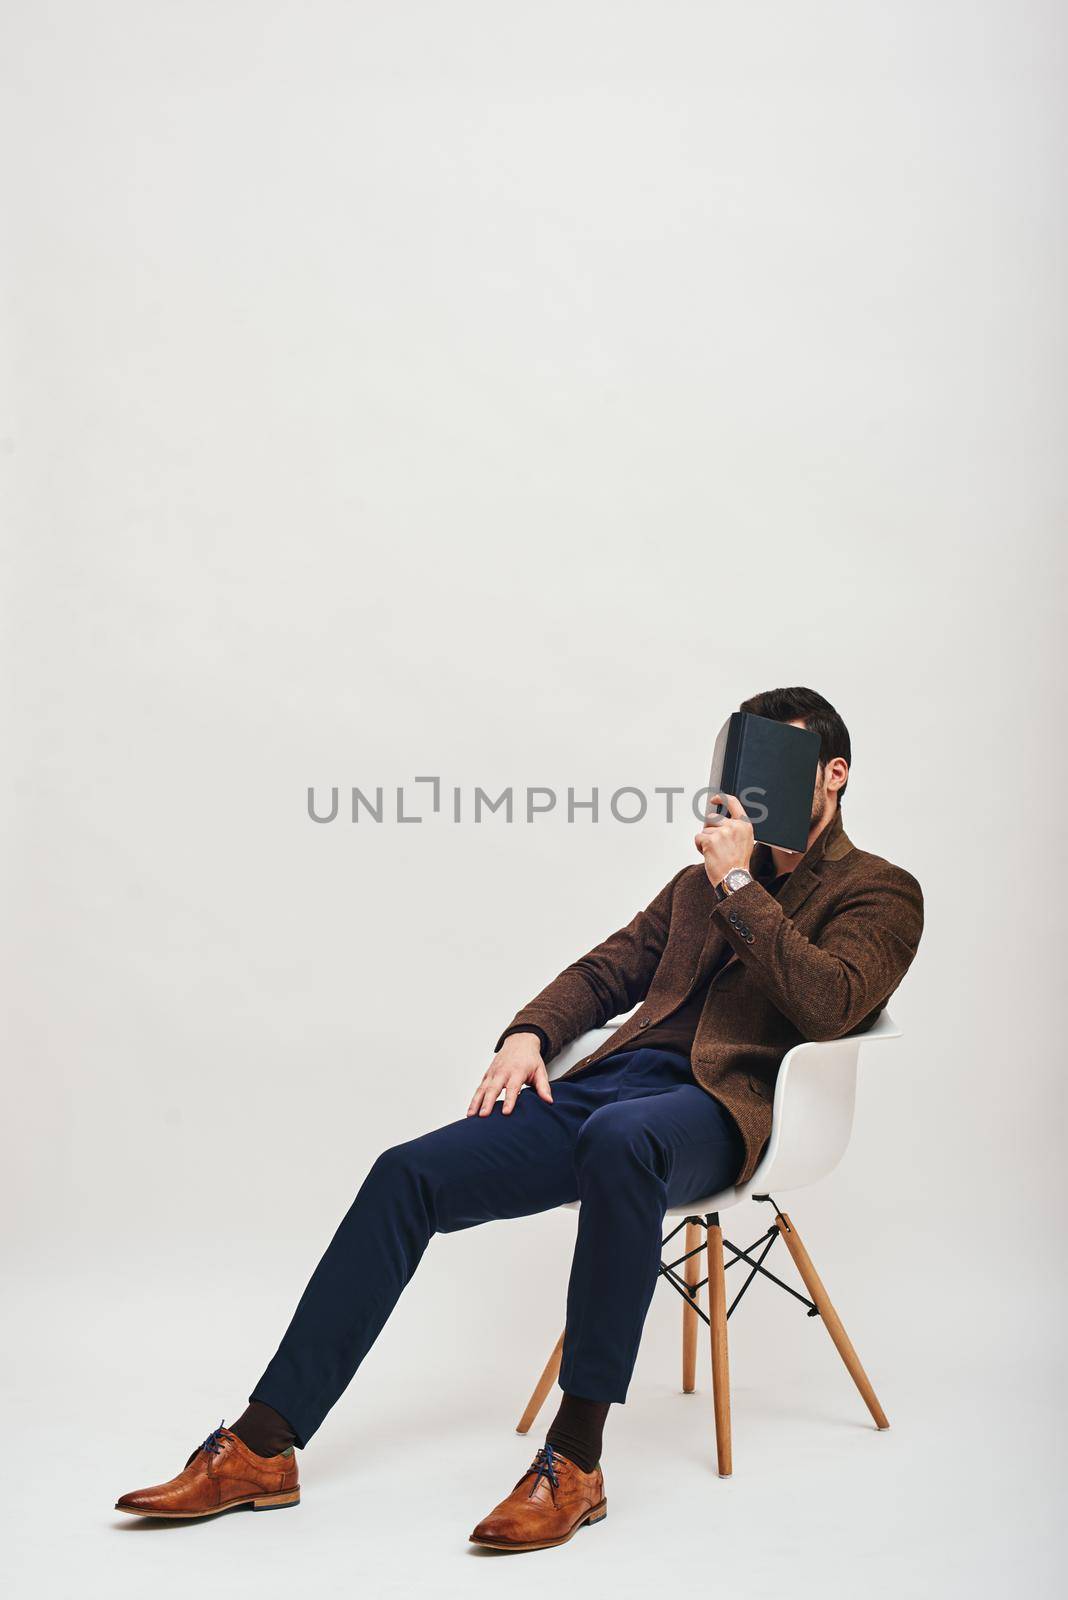 Alone with a book. Stylish man sitting on a chair isolated over white background by friendsstock